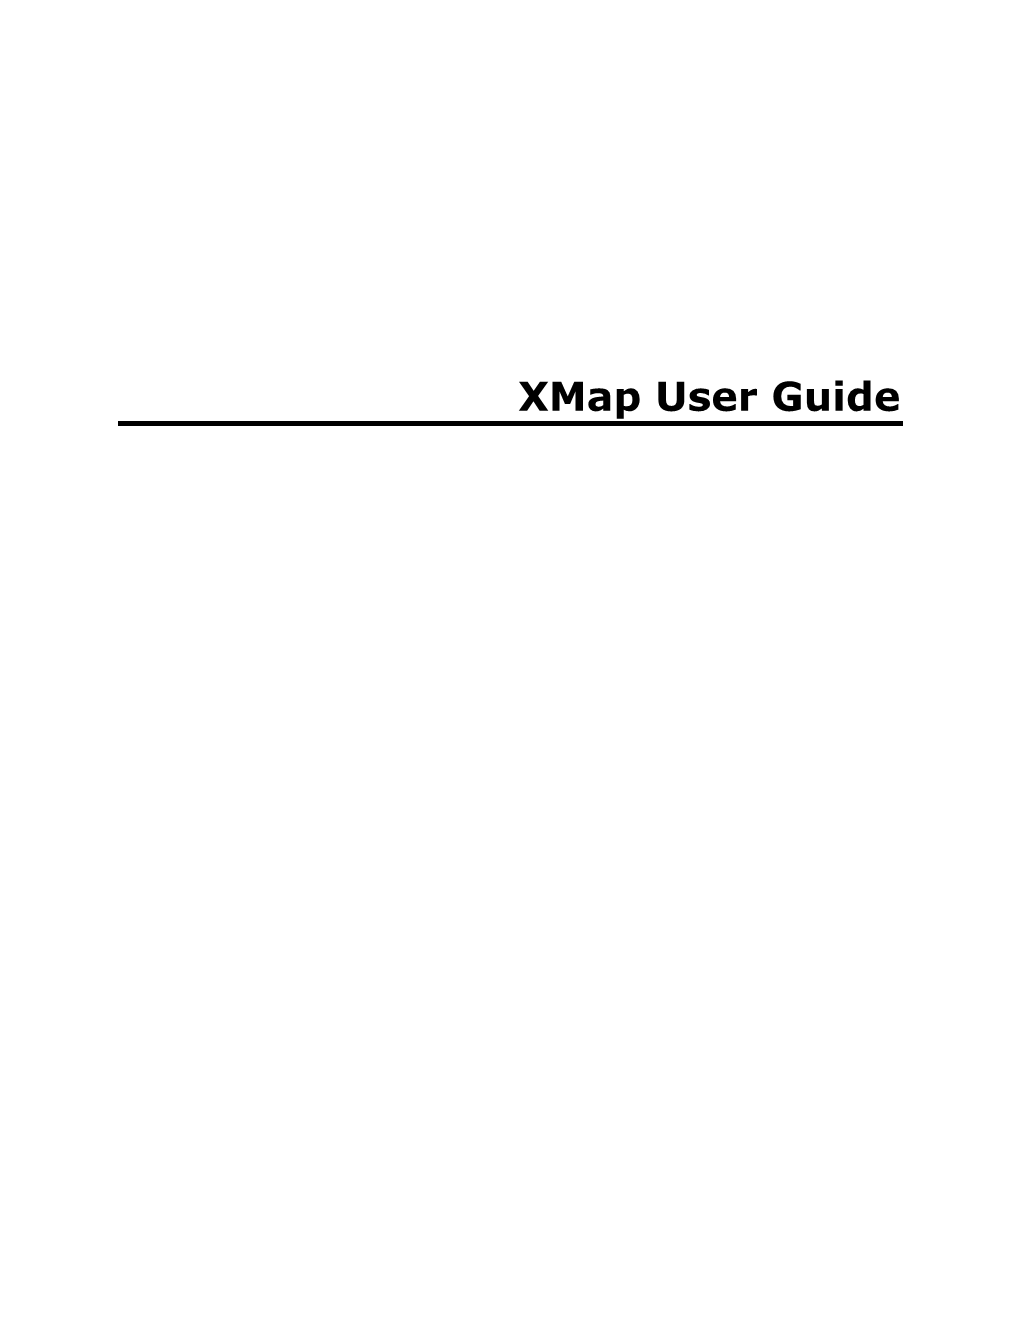 Xmap User Guide WARNING: Messaging, Tracking and SOS Functions Require an Active Iridium Satellite Subscription